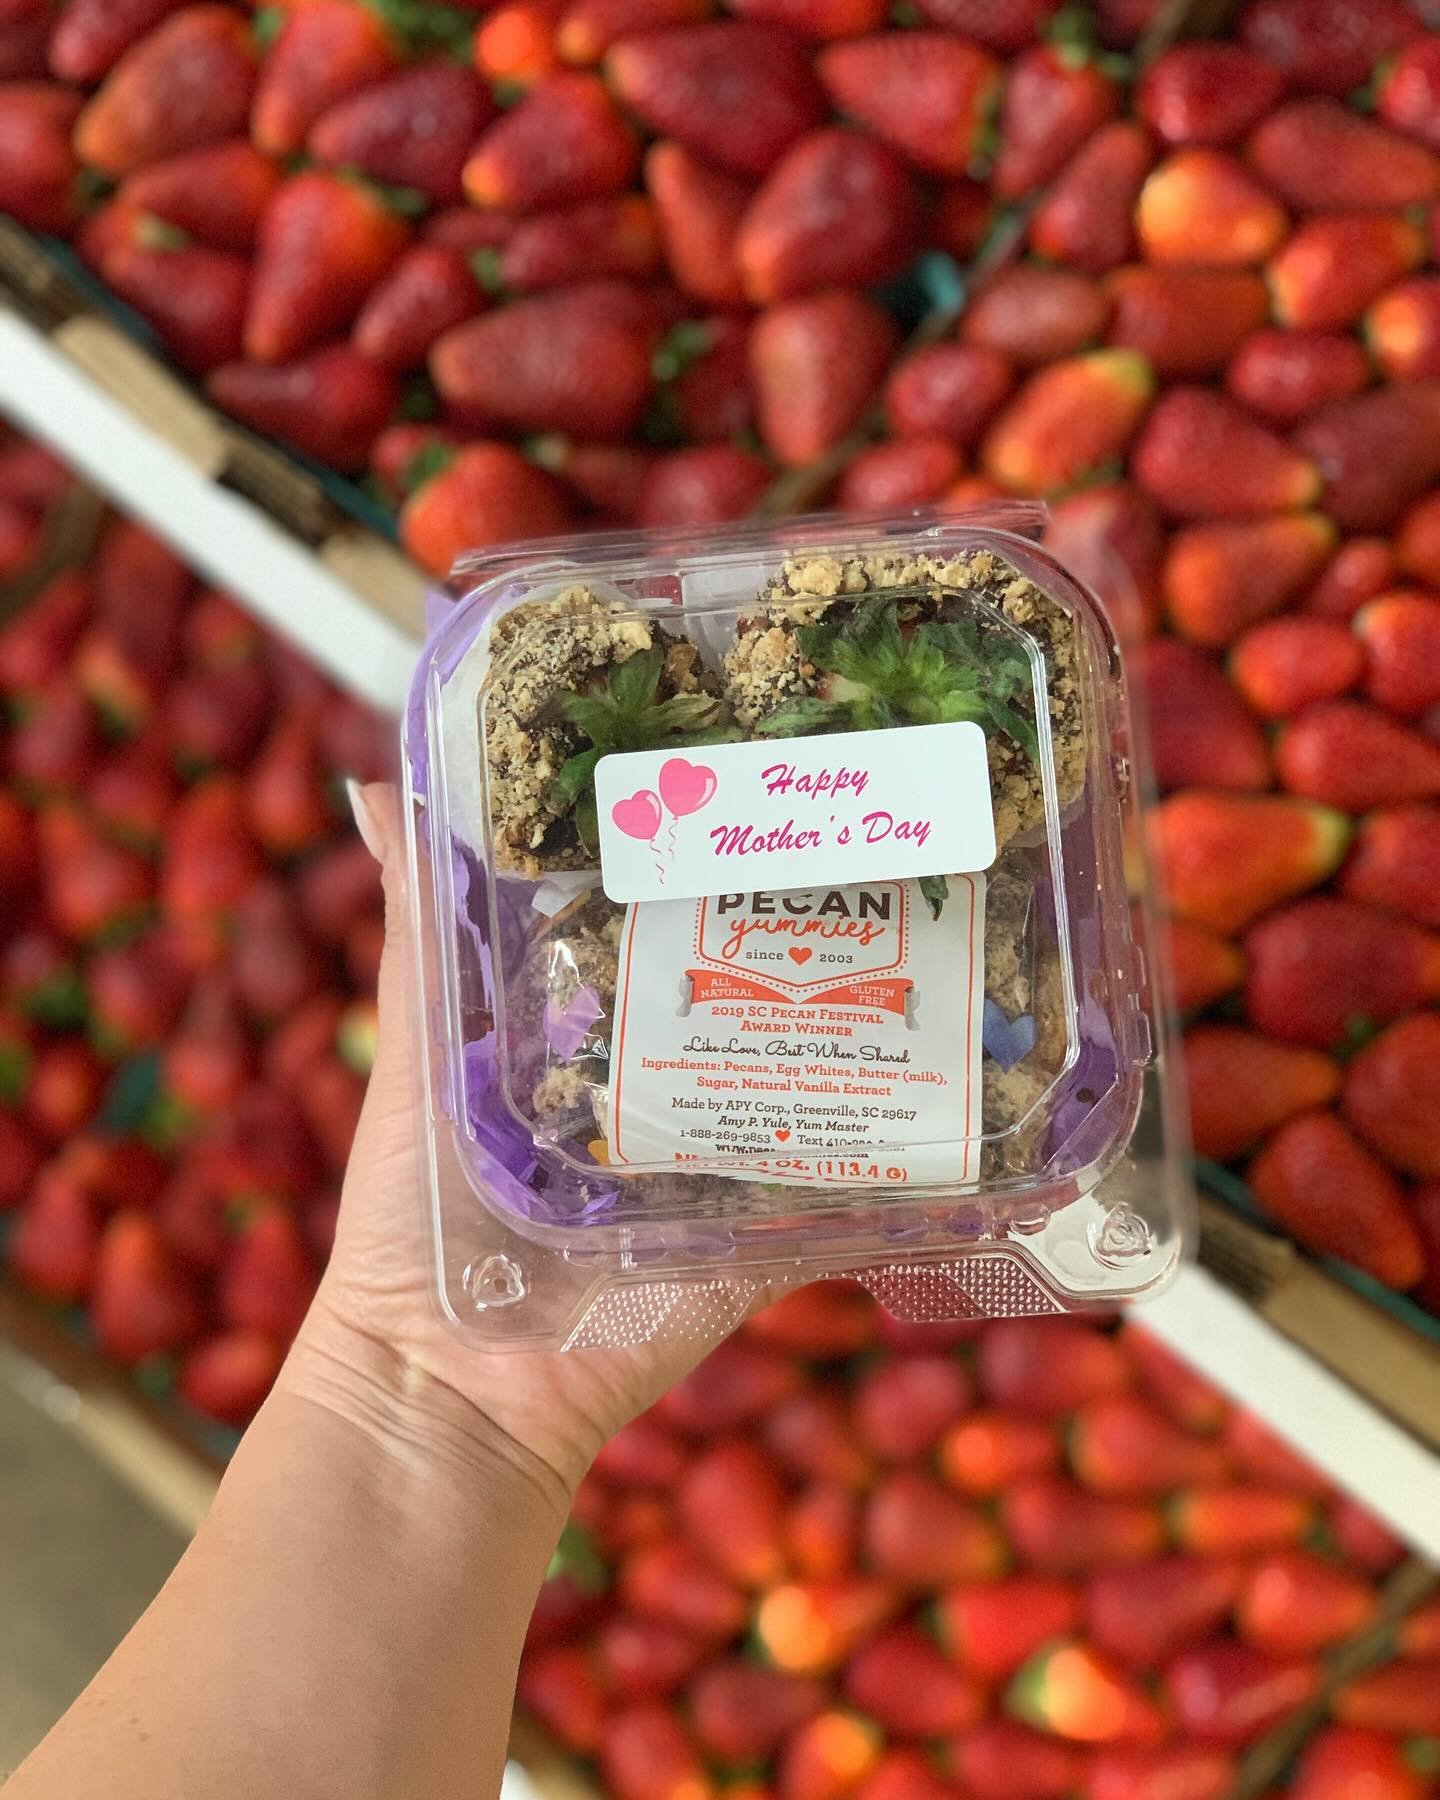 Yummies for Mummies. If mom prefers her strawberries chocolate covered, we have just the thing! @pecanyummies dropped off some special treats for Mother&rsquo;s Day.